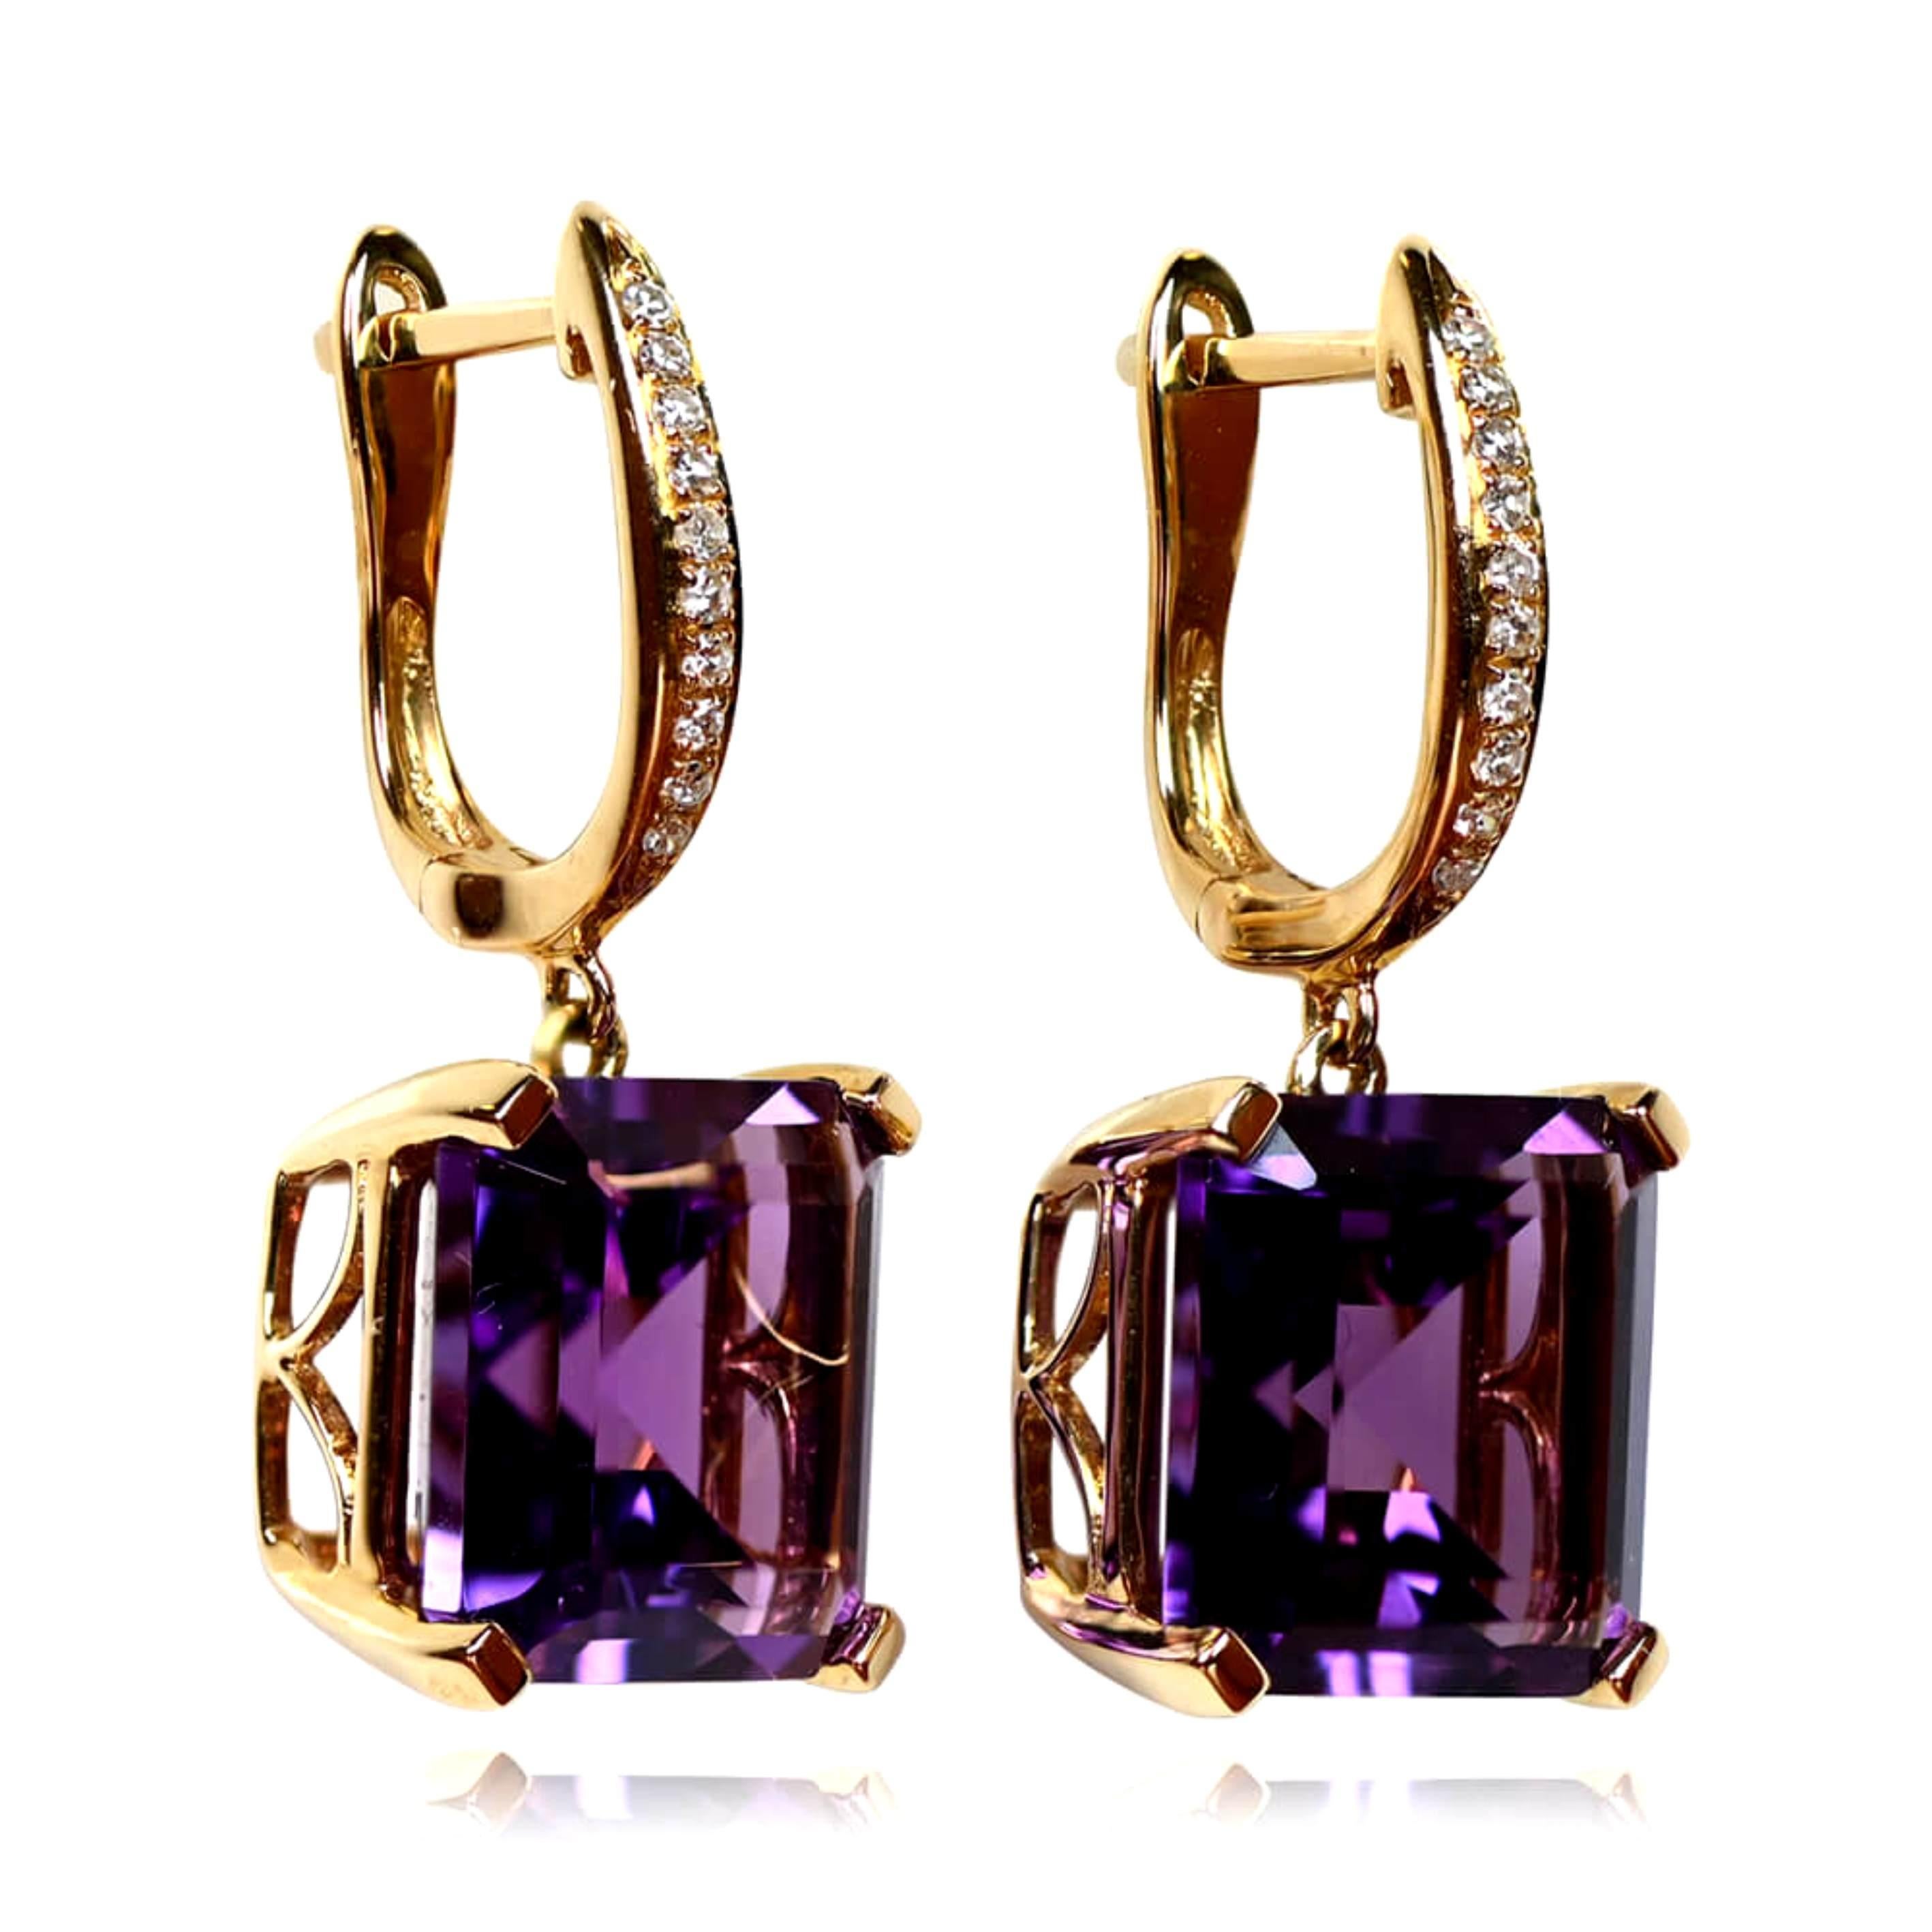 Adorn yourself with the captivating beauty of these gemstone earrings, showcasing emerald-cut amethysts weighing a total of 8.18 carats. Set in 18k yellow gold baskets, the amethysts take center stage, exuding a regal and vibrant allure. The